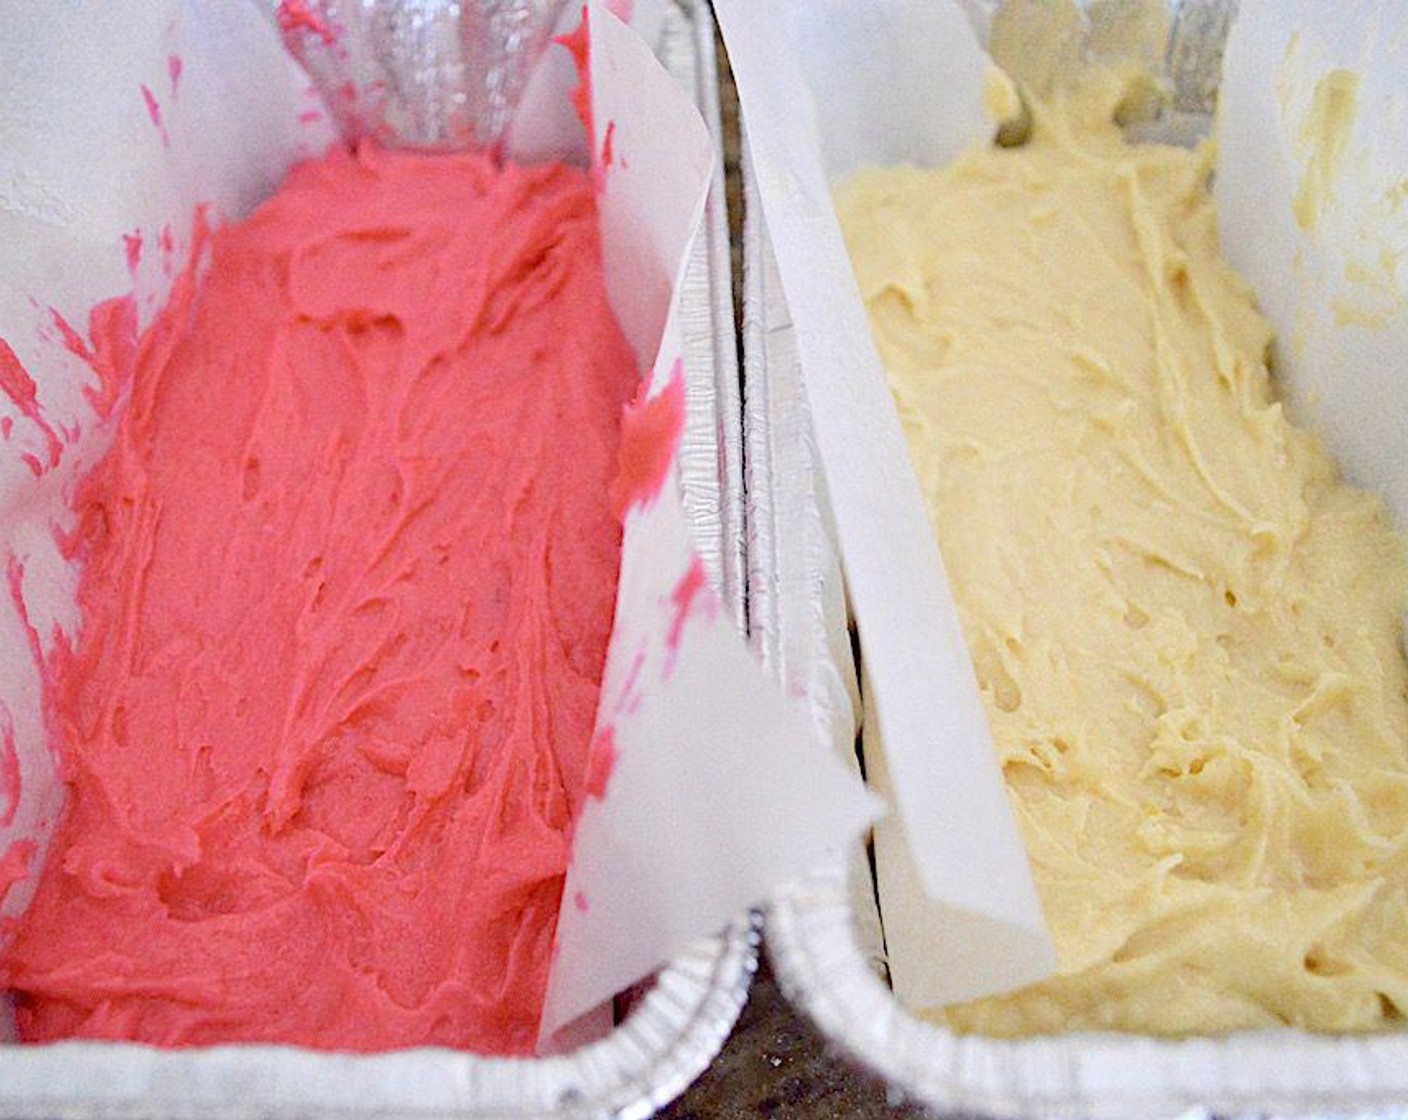 step 4 Divide the batter evenly into two bowls. Use a scale to be really precise ideally. Stir the Rose Water (1/2 tsp) and Pink Gel Food Coloring (1/4 tsp) into one of the bowls, and the Lemon (1) zest and juice into the other bowl. Now you have two separate, gorgeously flavored batter.